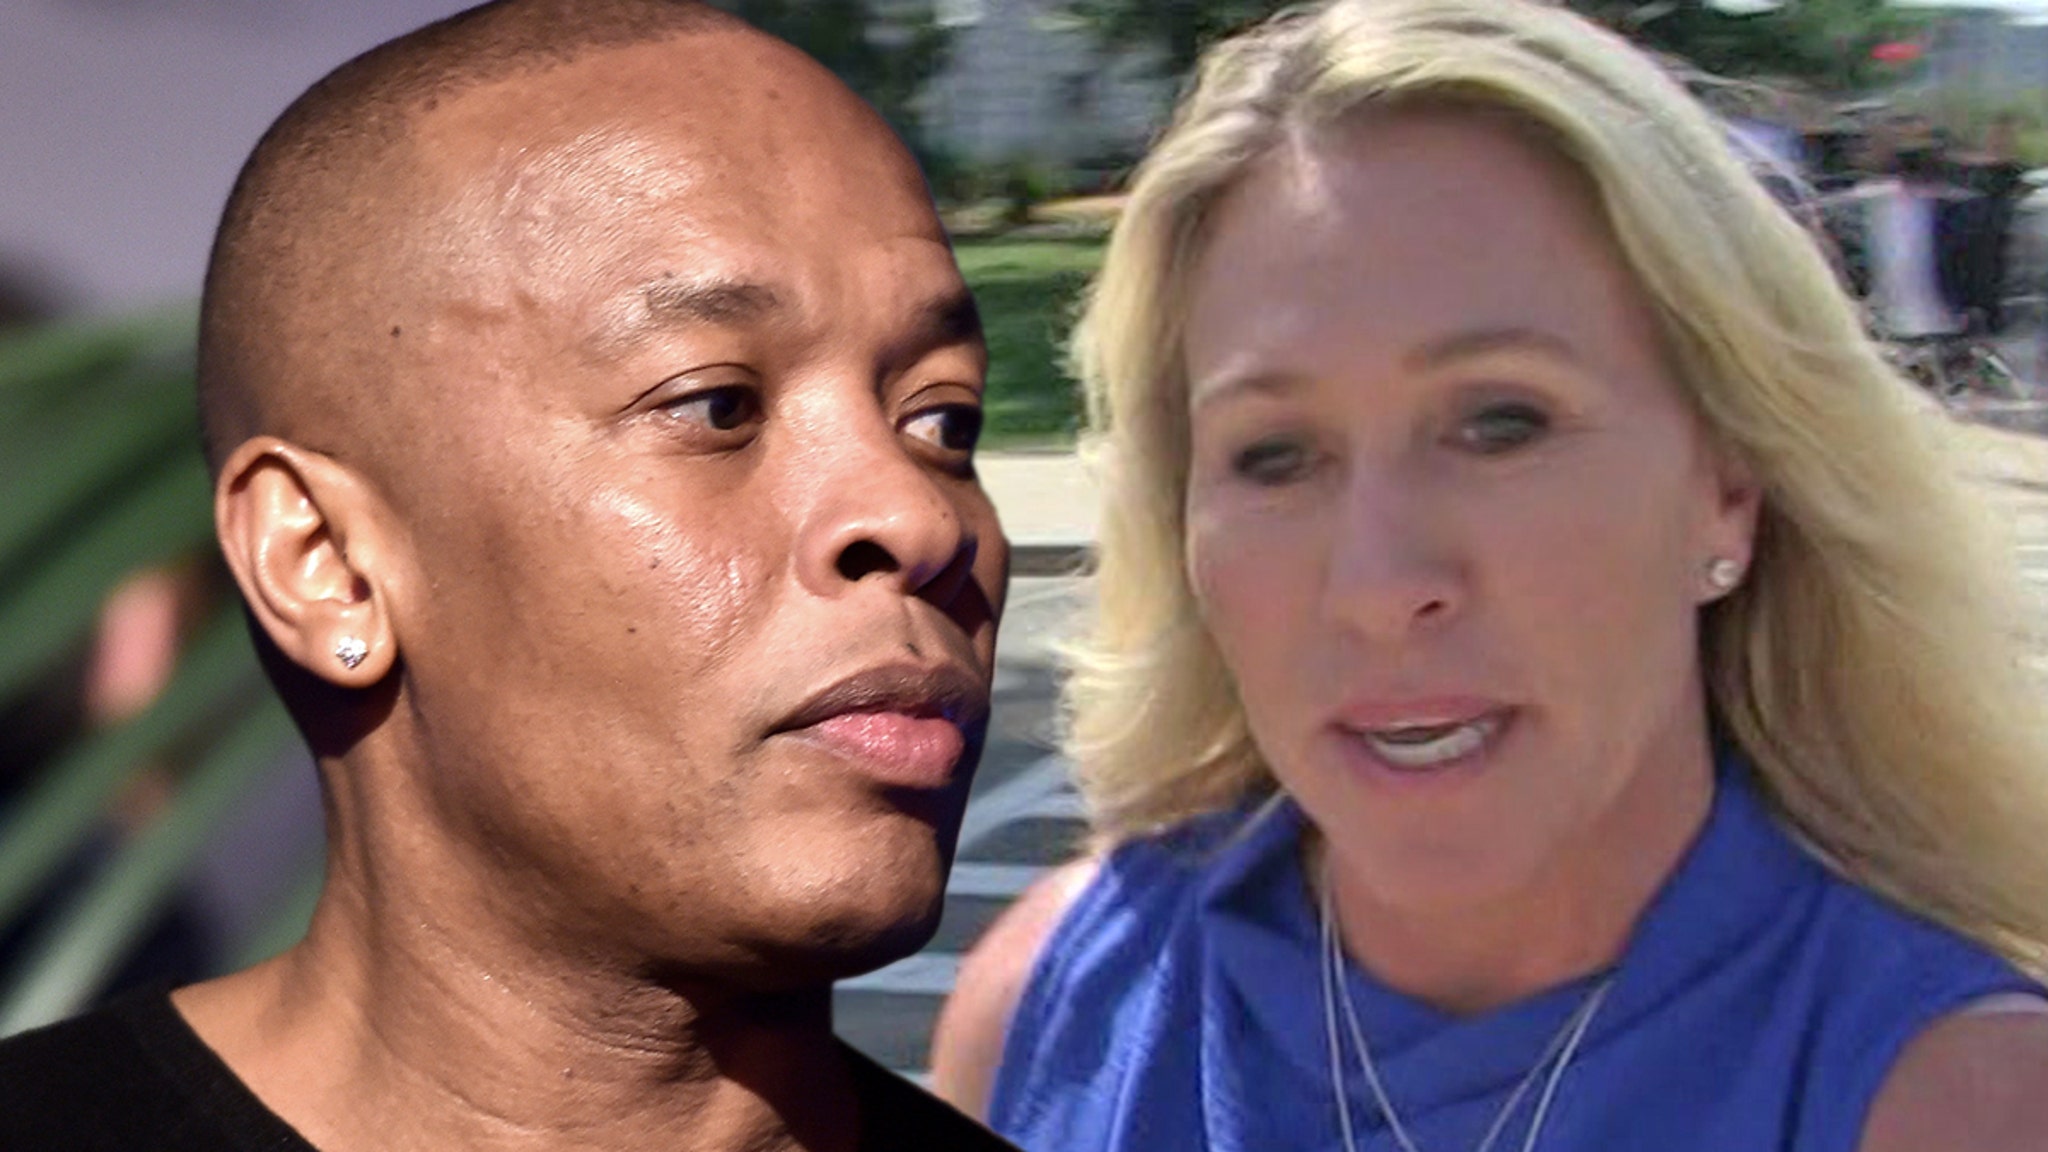 Dr. Dre Slams ‘Hateful’ Rep. Marjorie Taylor Green for Using His Music